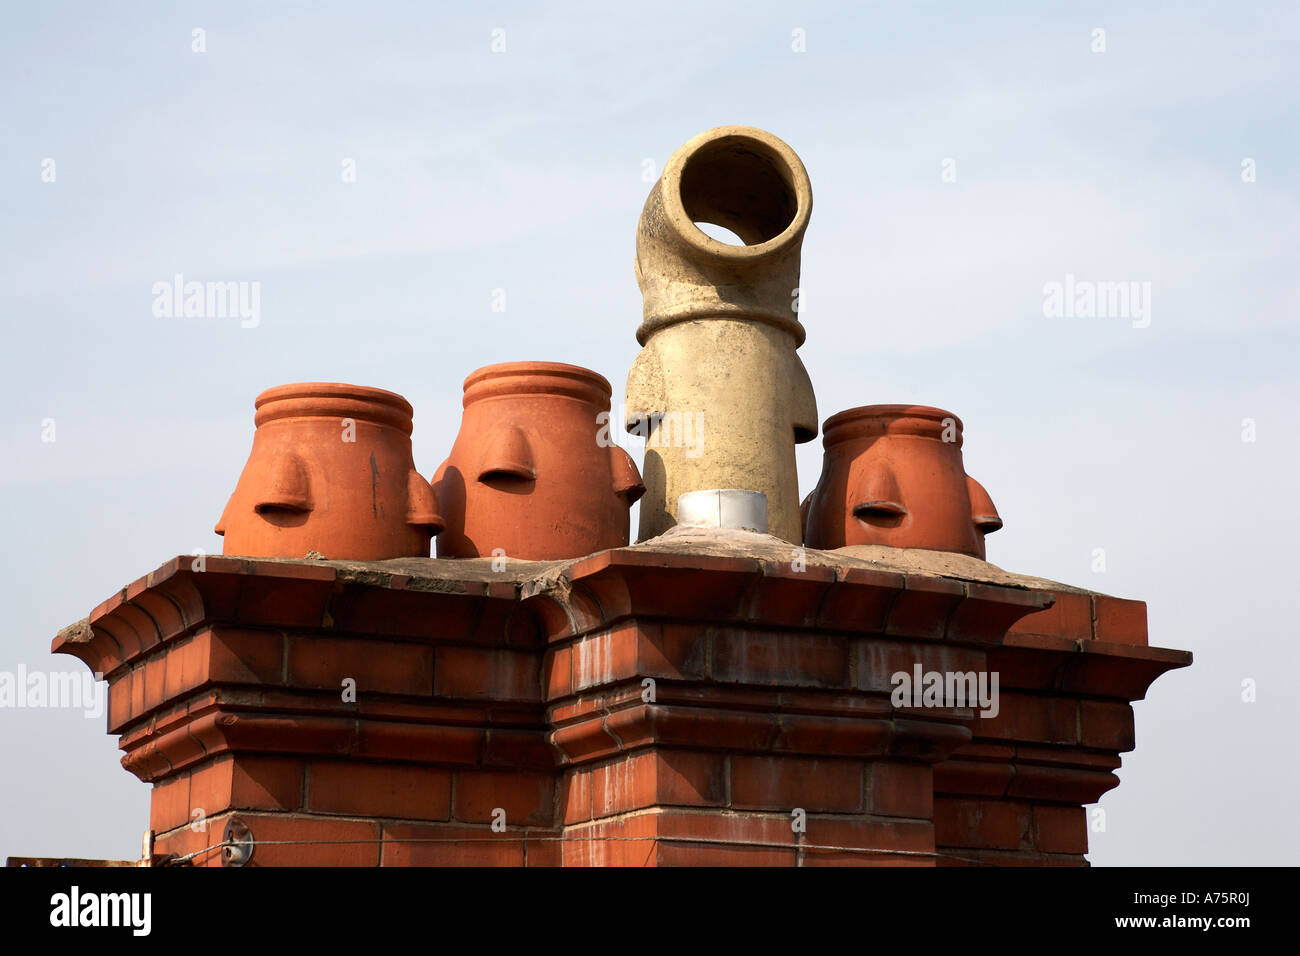 chimneys on the roof of a building chester cheshire england uk Stock Photo